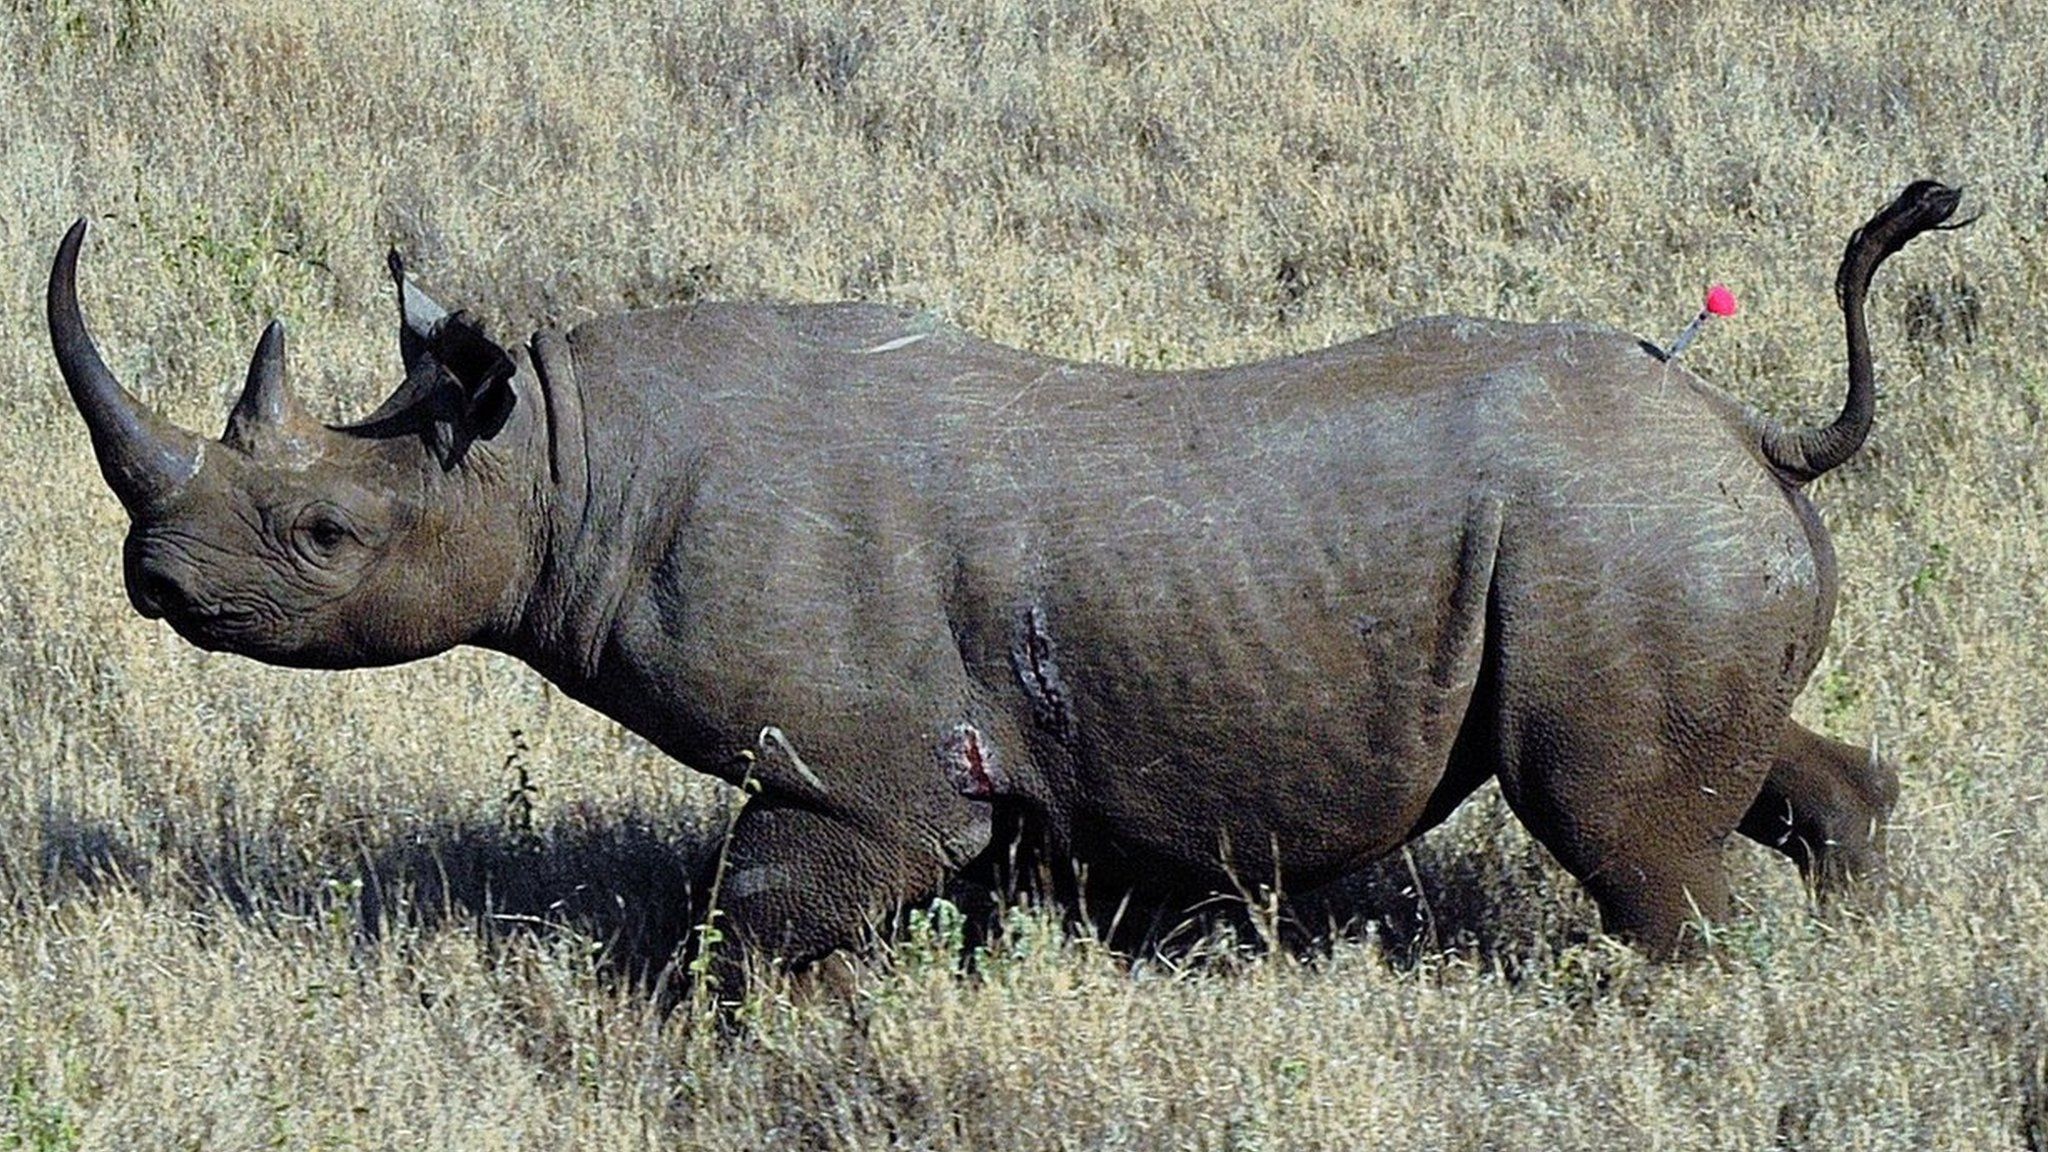 A wild male black rhino named Sambu is pictured after it was darted from a helicopter in Lewa conservancy on August 28, 2013.